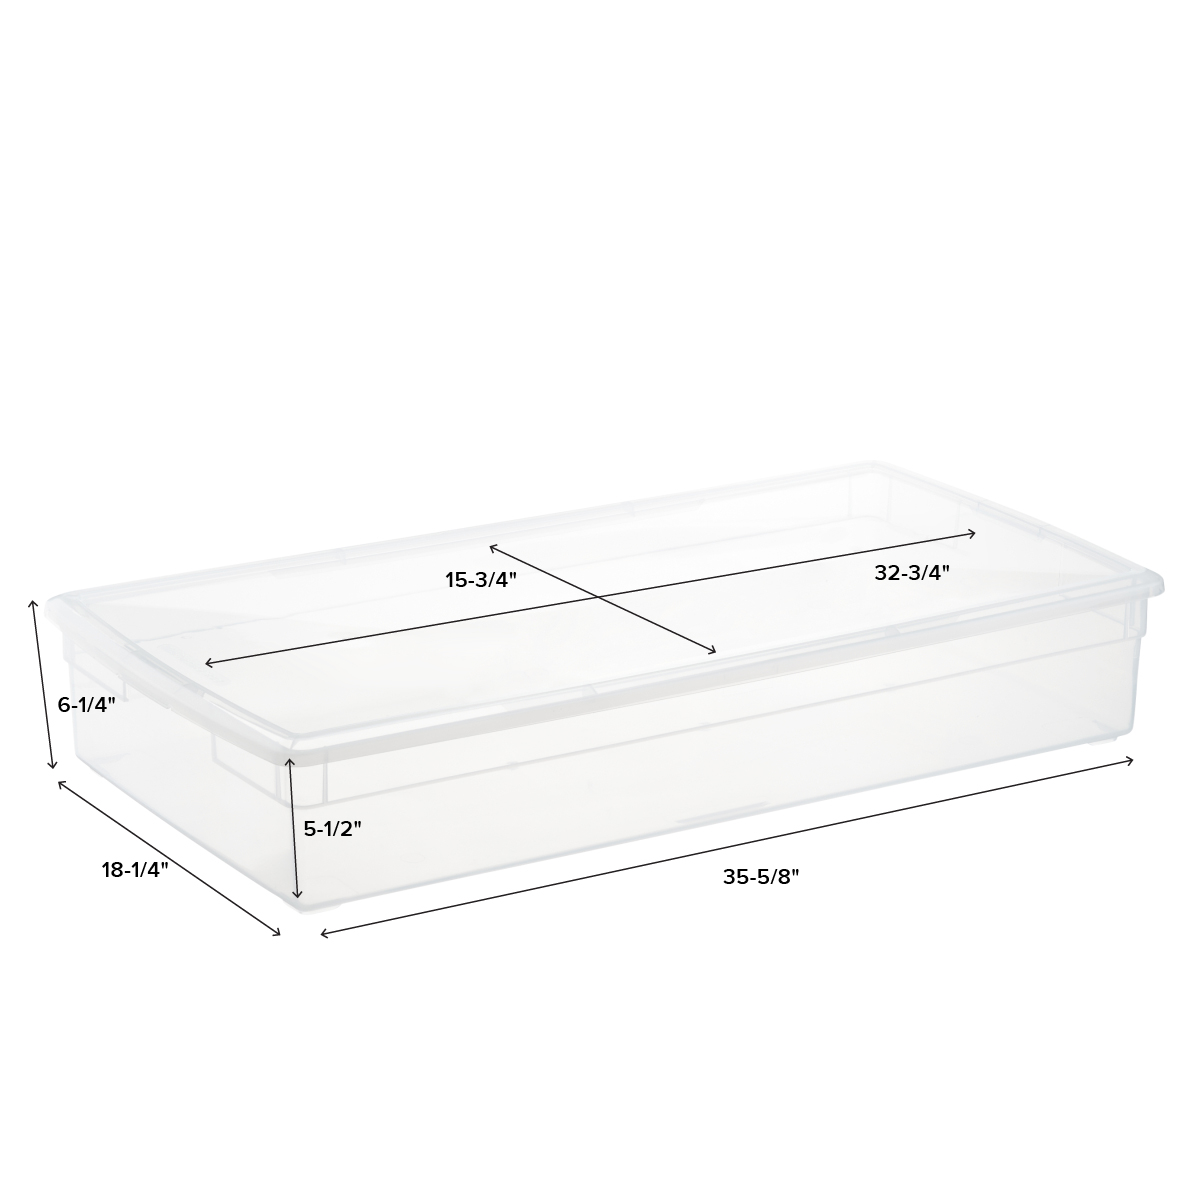 https://www.containerstore.com/catalogimages/419713/10008765-our-long-underbed-box-DIM.jpg